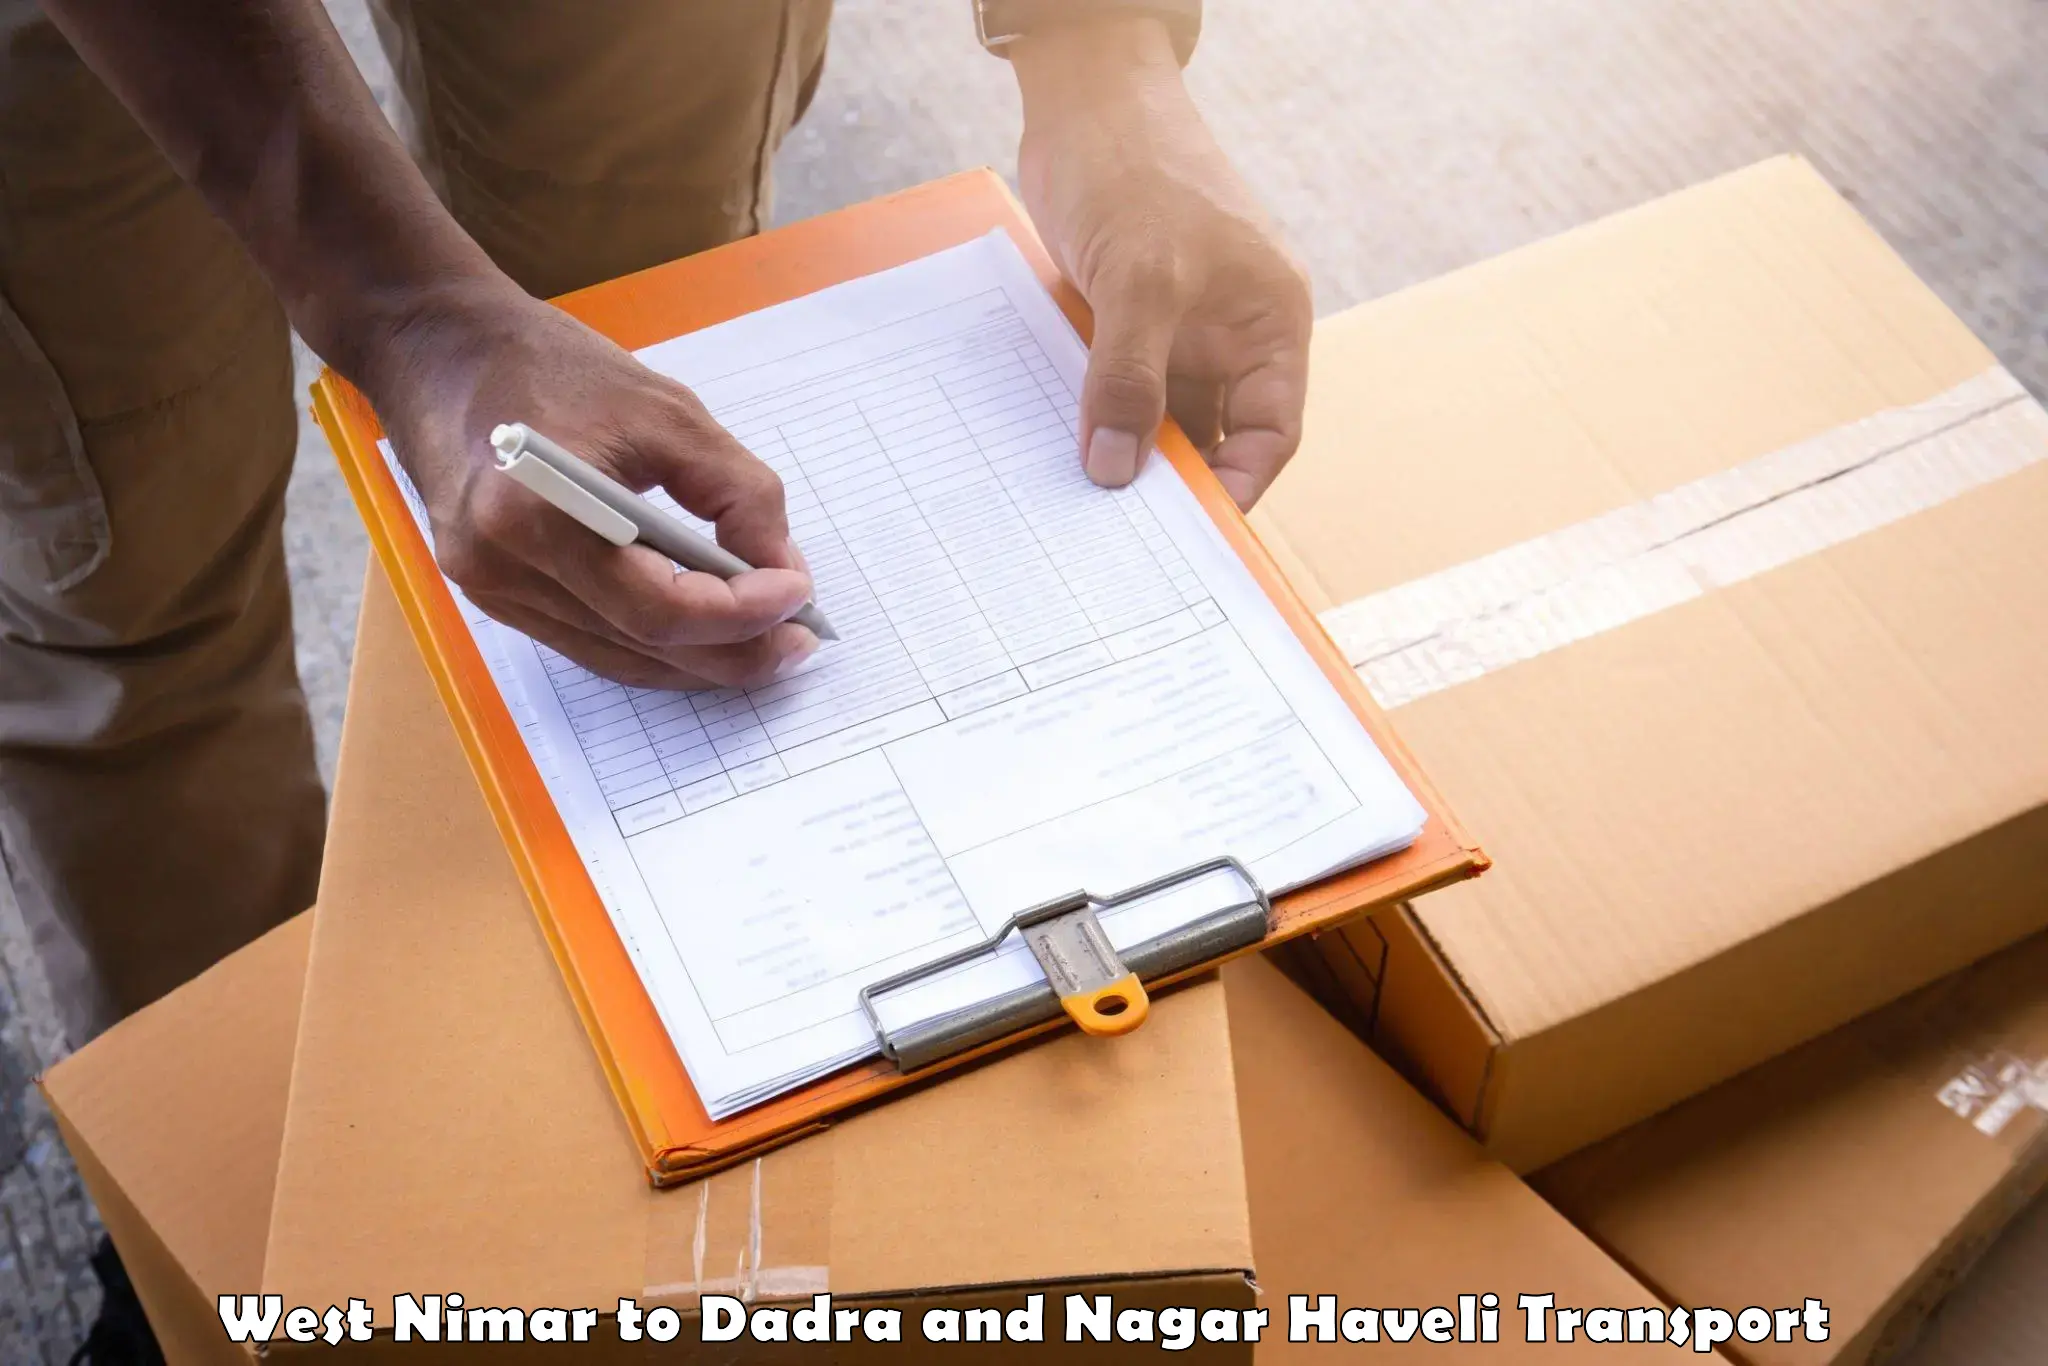 Parcel transport services in West Nimar to Dadra and Nagar Haveli